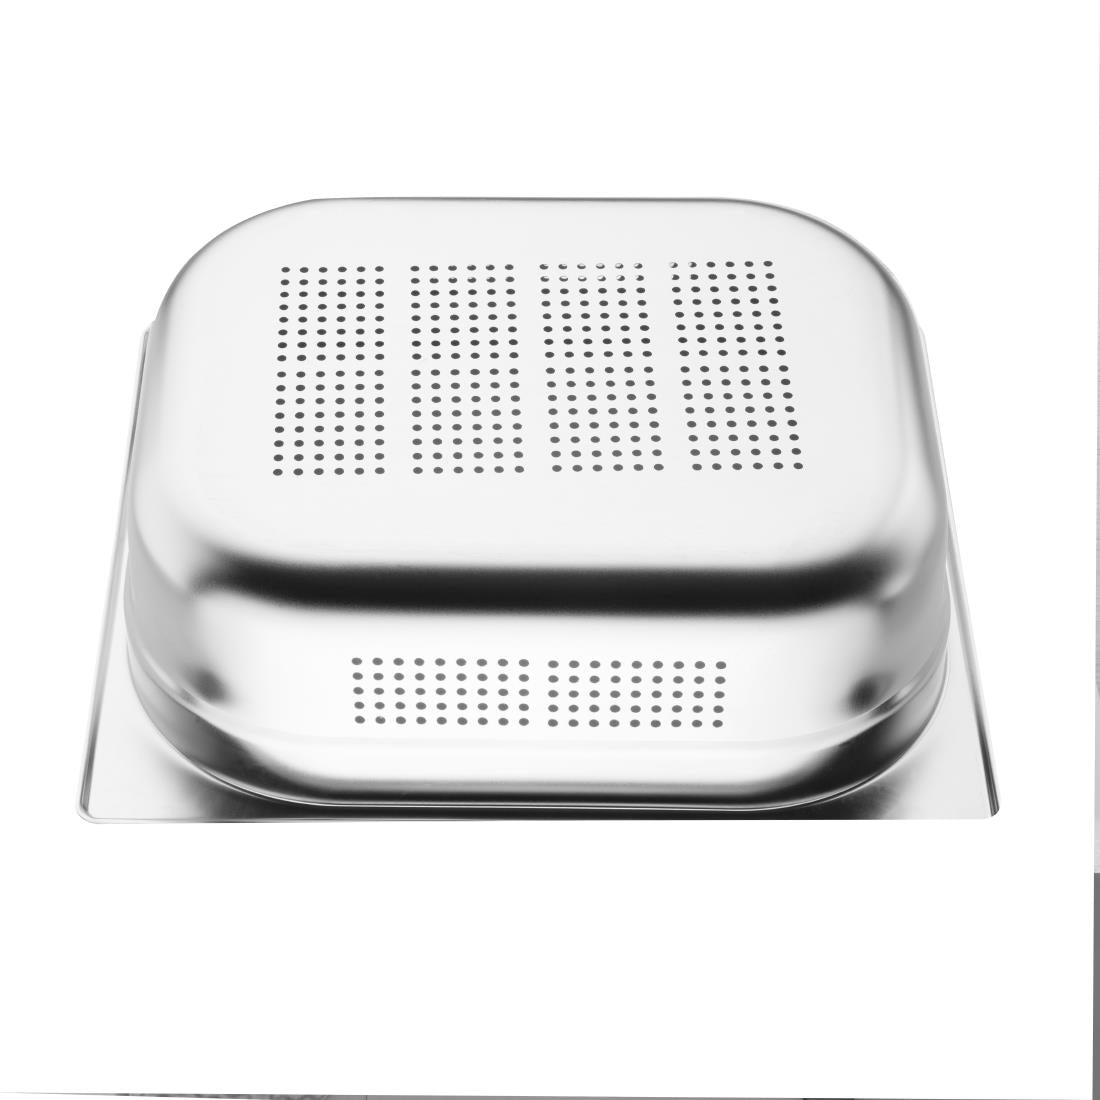 Vogue Stainless Steel Perforated 1/2 Gastronorm Pan 100mm